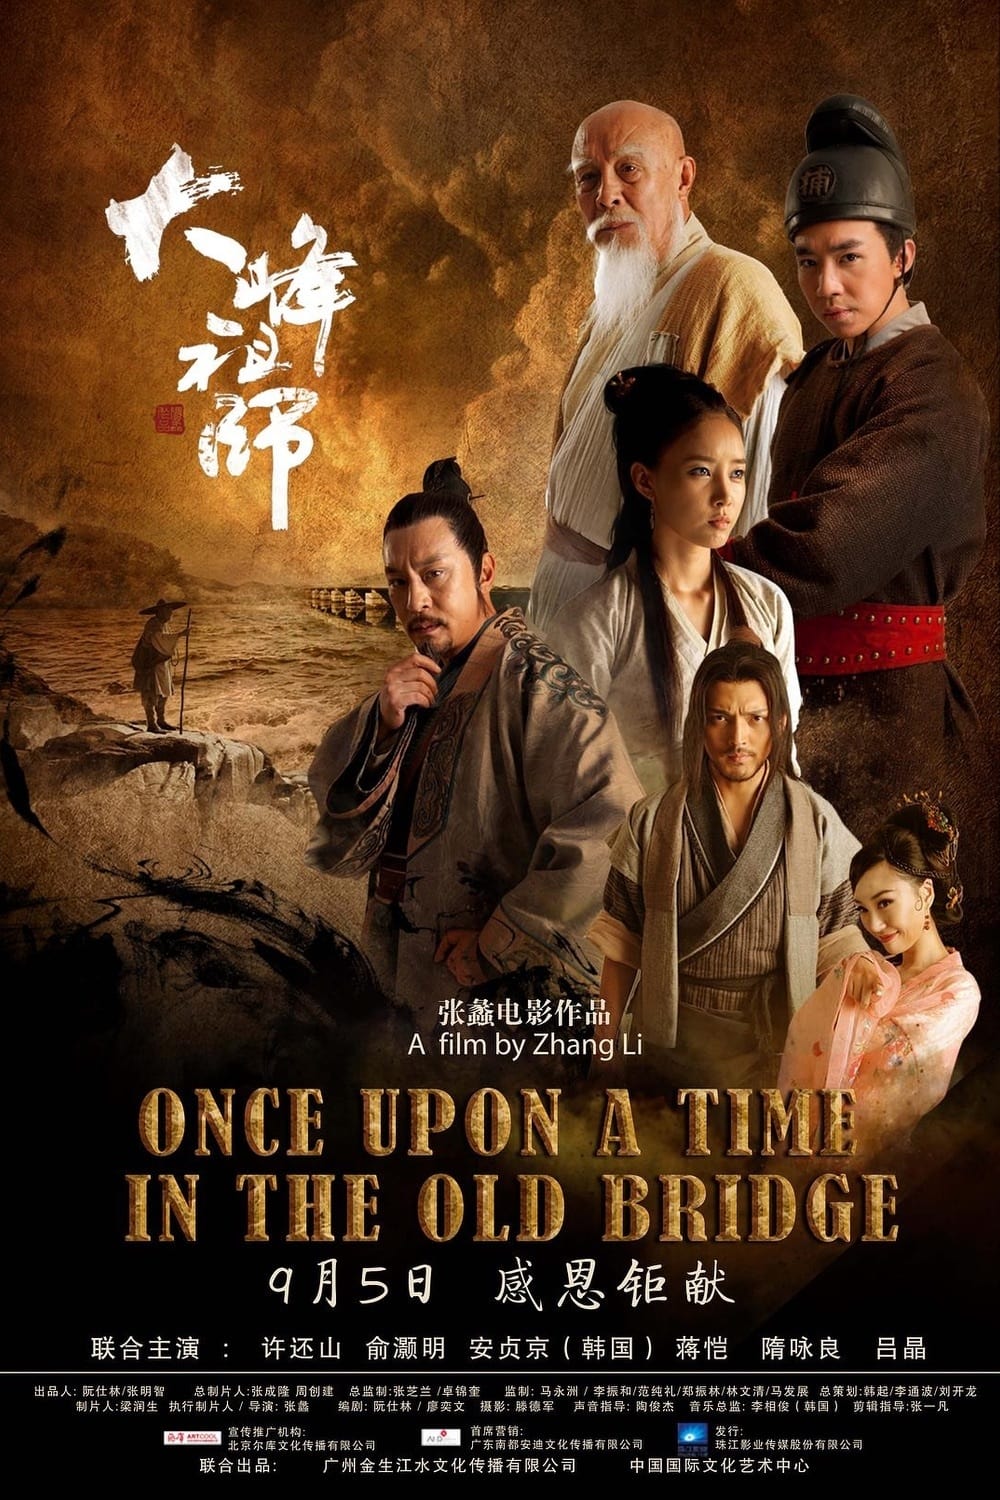 Once Upon a Time in the Old Bridge